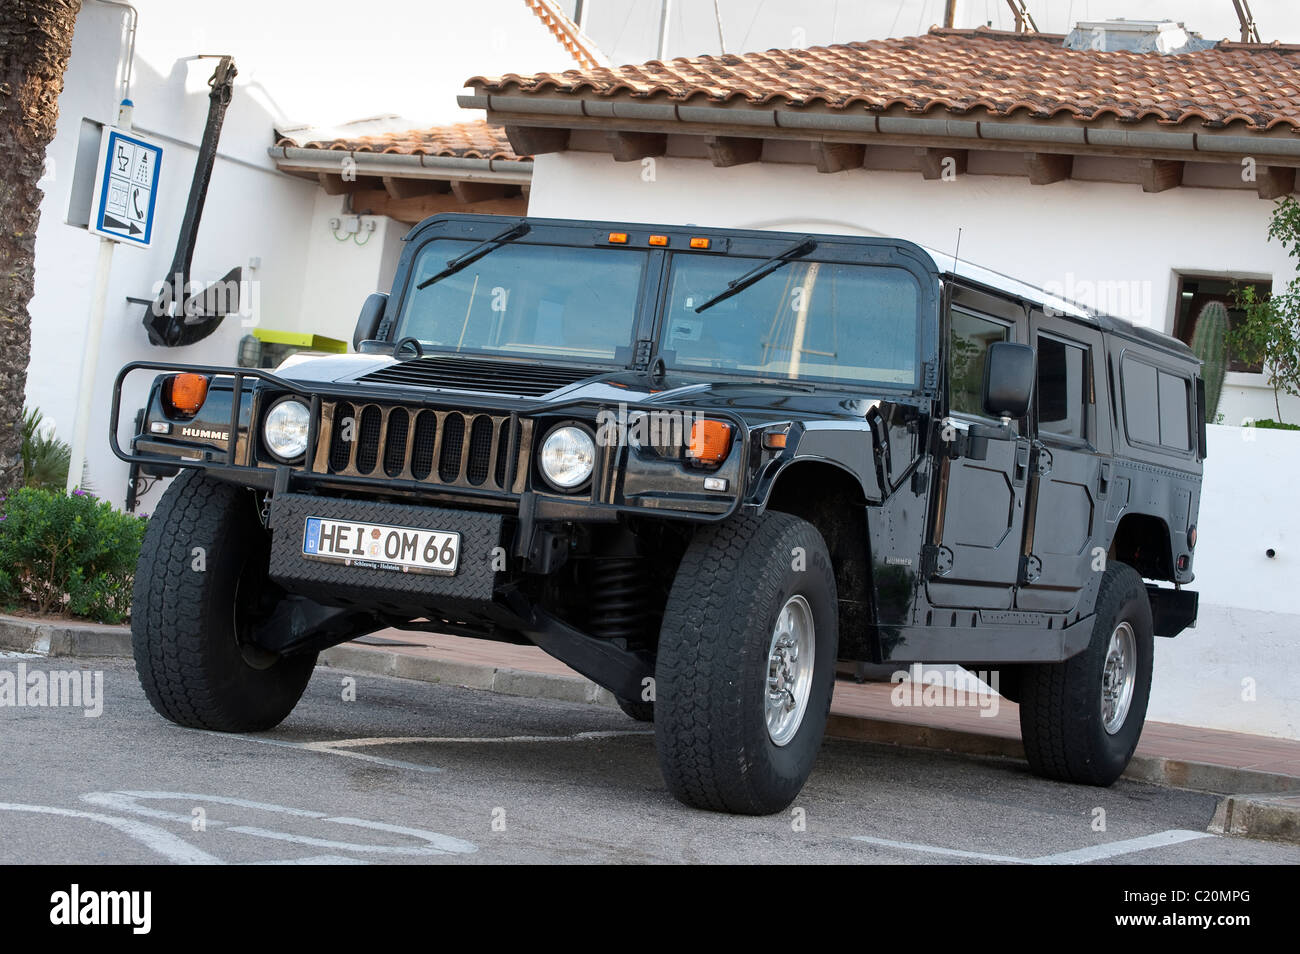 Hummer H1 civilian off road vehicle in Spain. Stock Photo